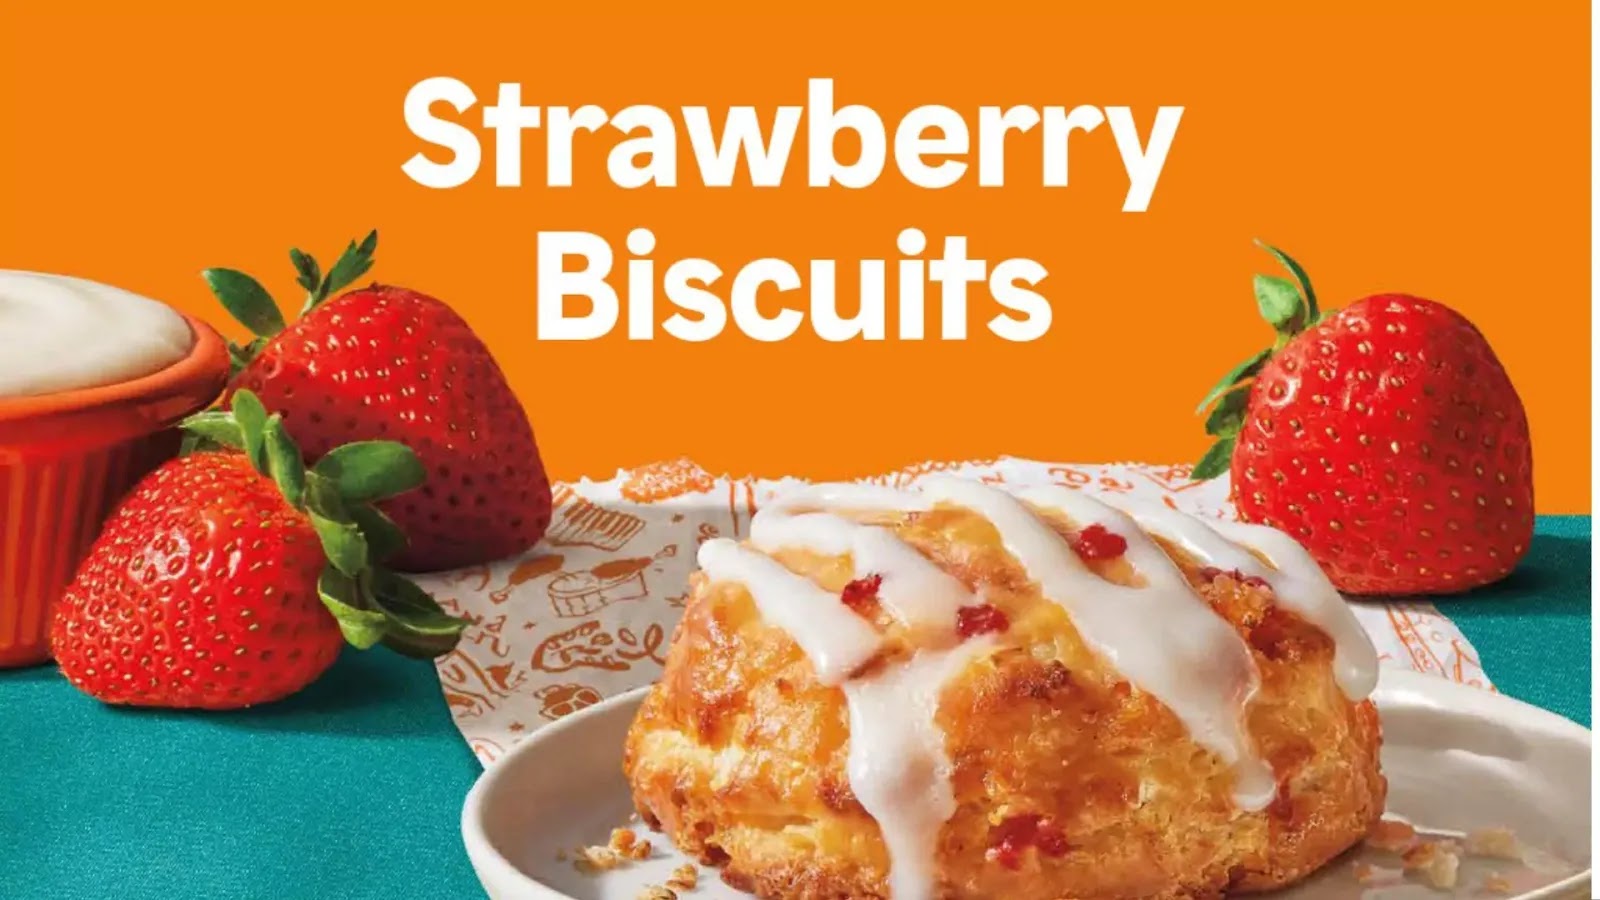 Everything You Need to Know About Popeyes New Strawberry Biscuits